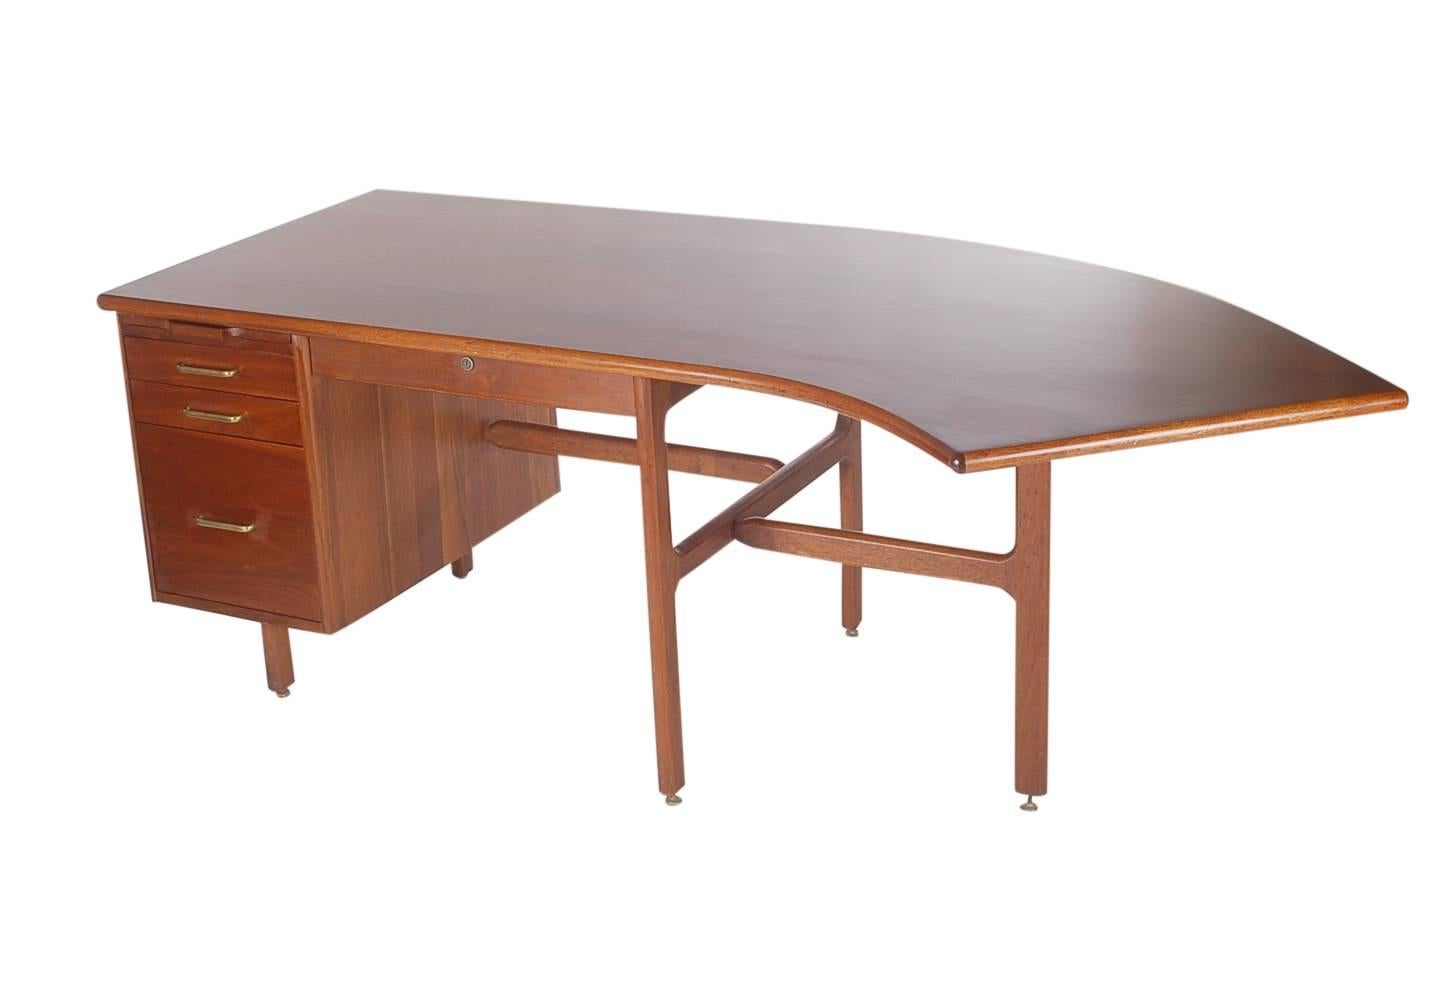 A large and unusual designed curved desk, circa 1960s. Extremely heavy and well built in solid walnut. Very well cared for through the years and ready for immediate use. 

In the style of: George Nelson, Jens Risom, Florence Knoll.